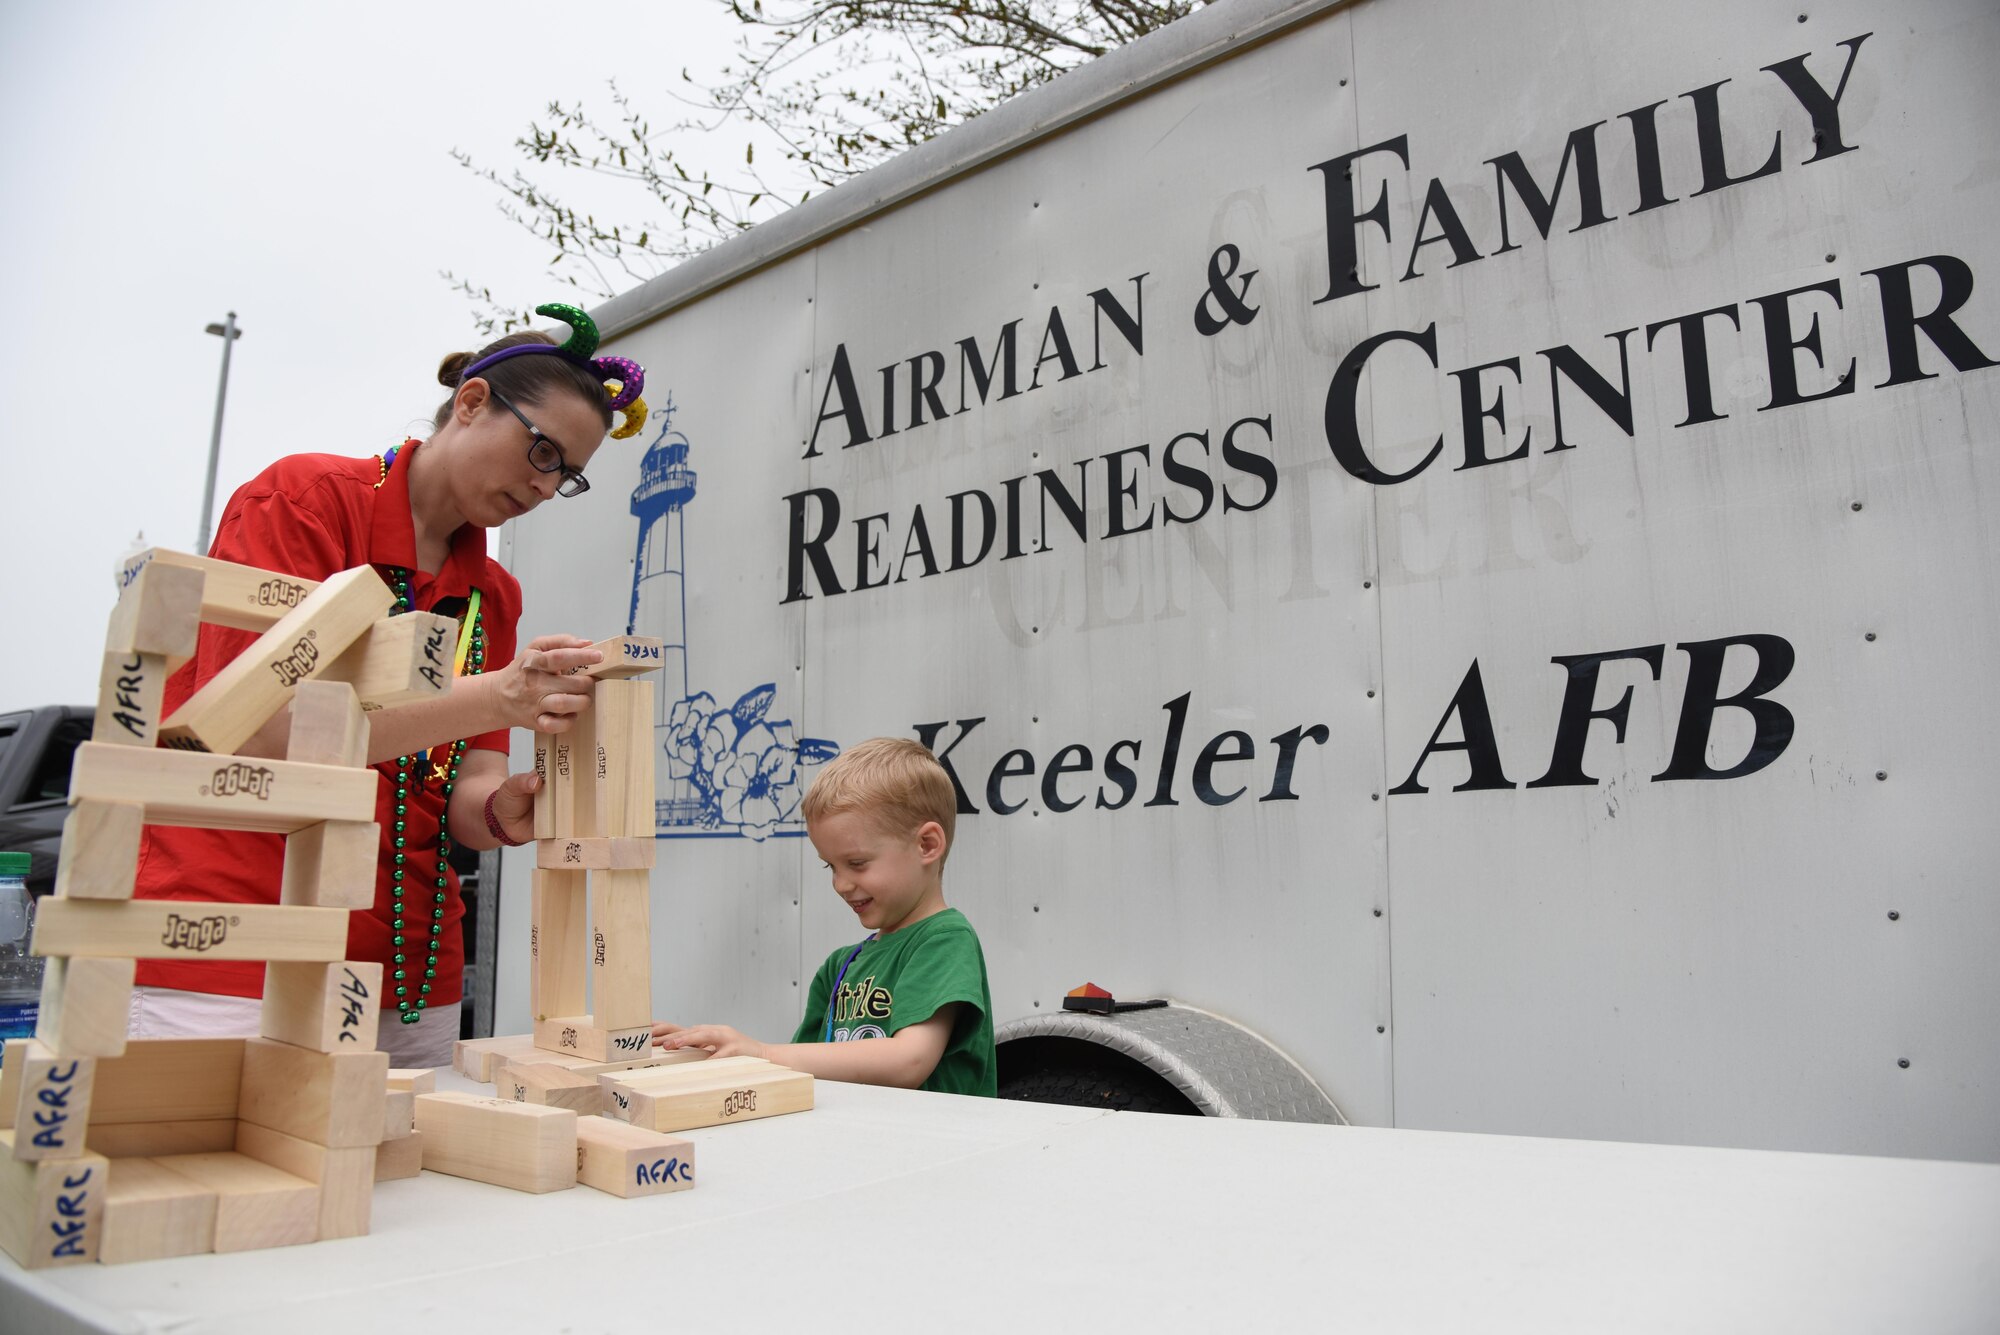 Alicia and Fox Cleary, family of Tech. Sgt. Richard Cleary, 336th Training Squadron instructor, play with building blocks during the Gulf Coast Carnival Association Mardi Gras parade Feb. 28, 2017, in Biloxi, Miss. The 81st Force Support Squadron’s Airman and Family Readiness Center staff invited families of deployed members to the event and provided food and entertainment to them prior to the start of the parade. Alicia is a 336th TRS key spouse. (U.S. Air Force photo by Kemberly Groue)